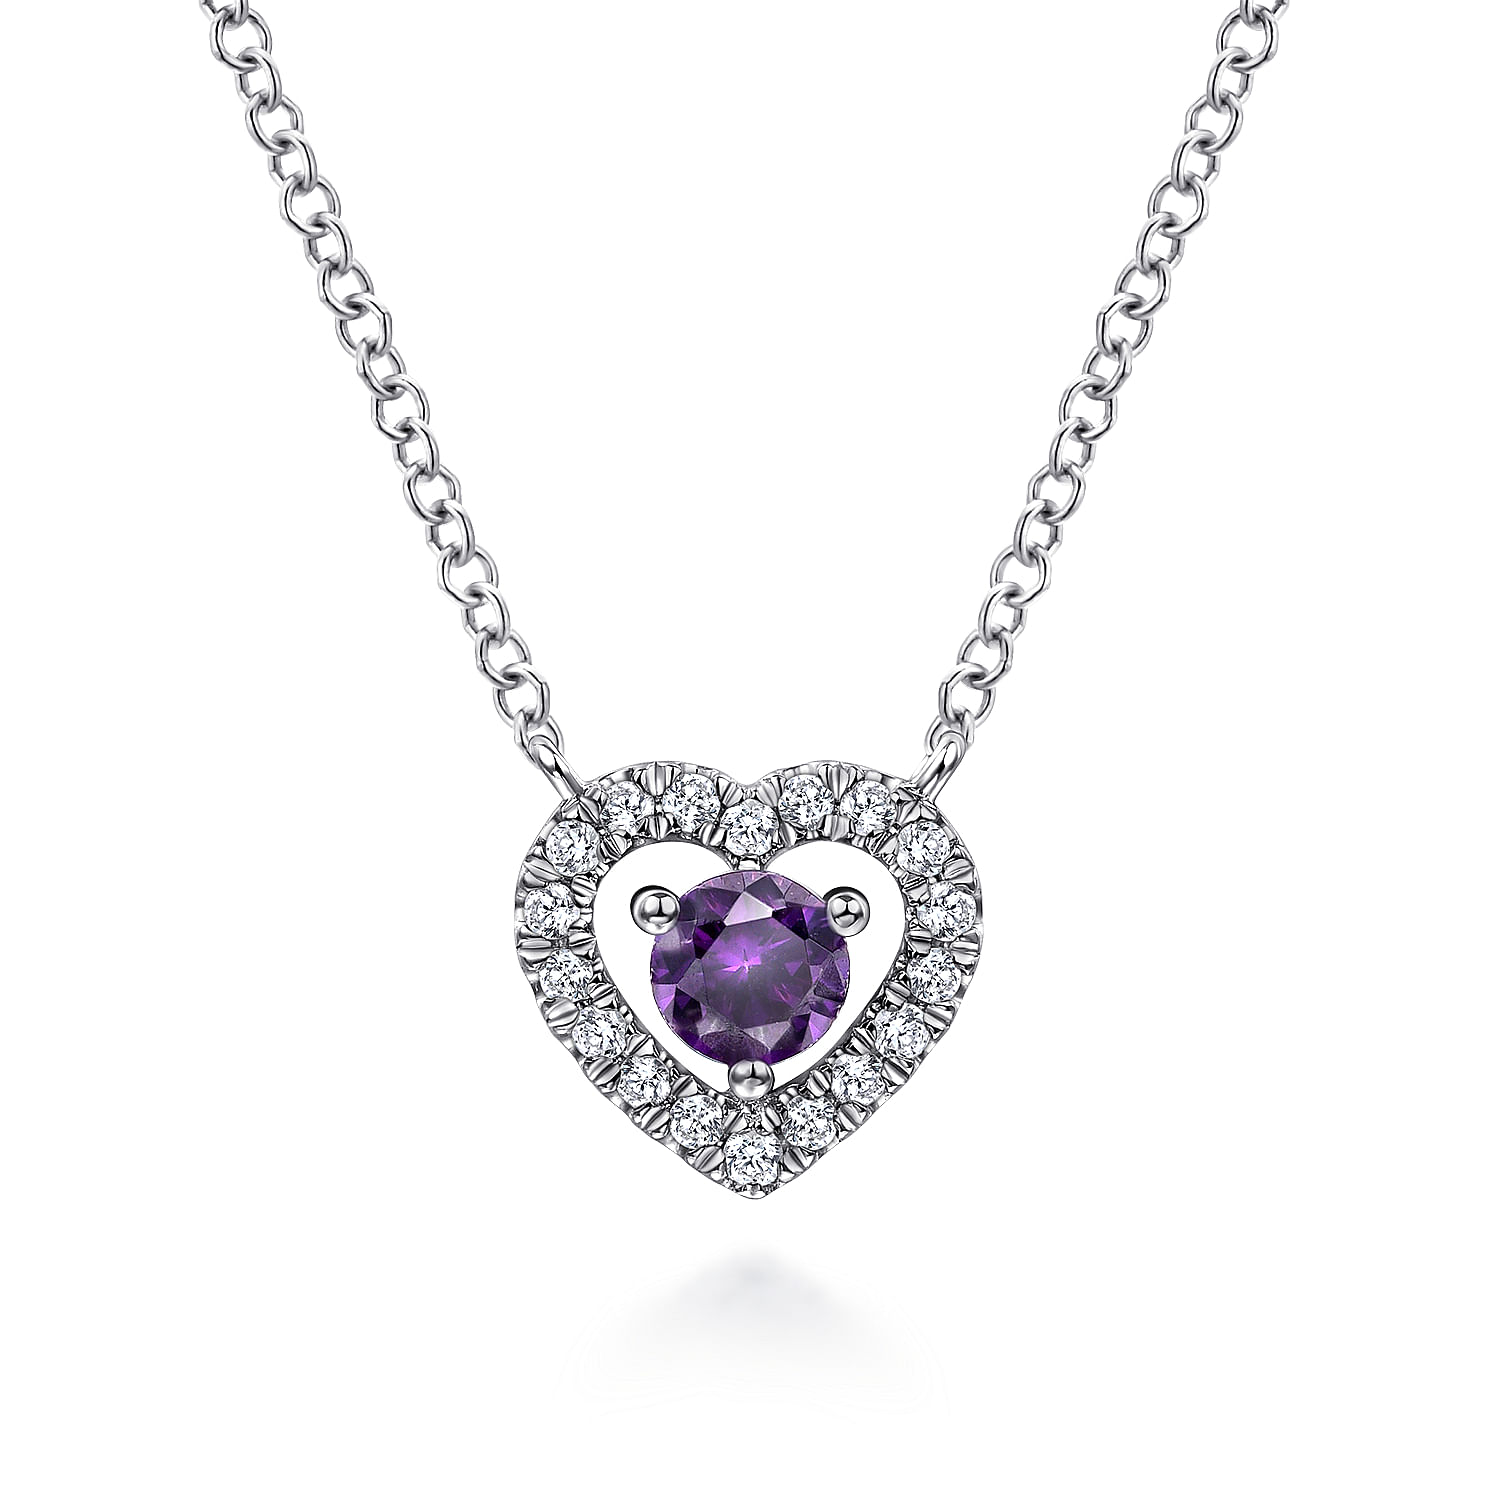 14K White Gold Round Amethyst and Diamond Heart Pendant Necklace